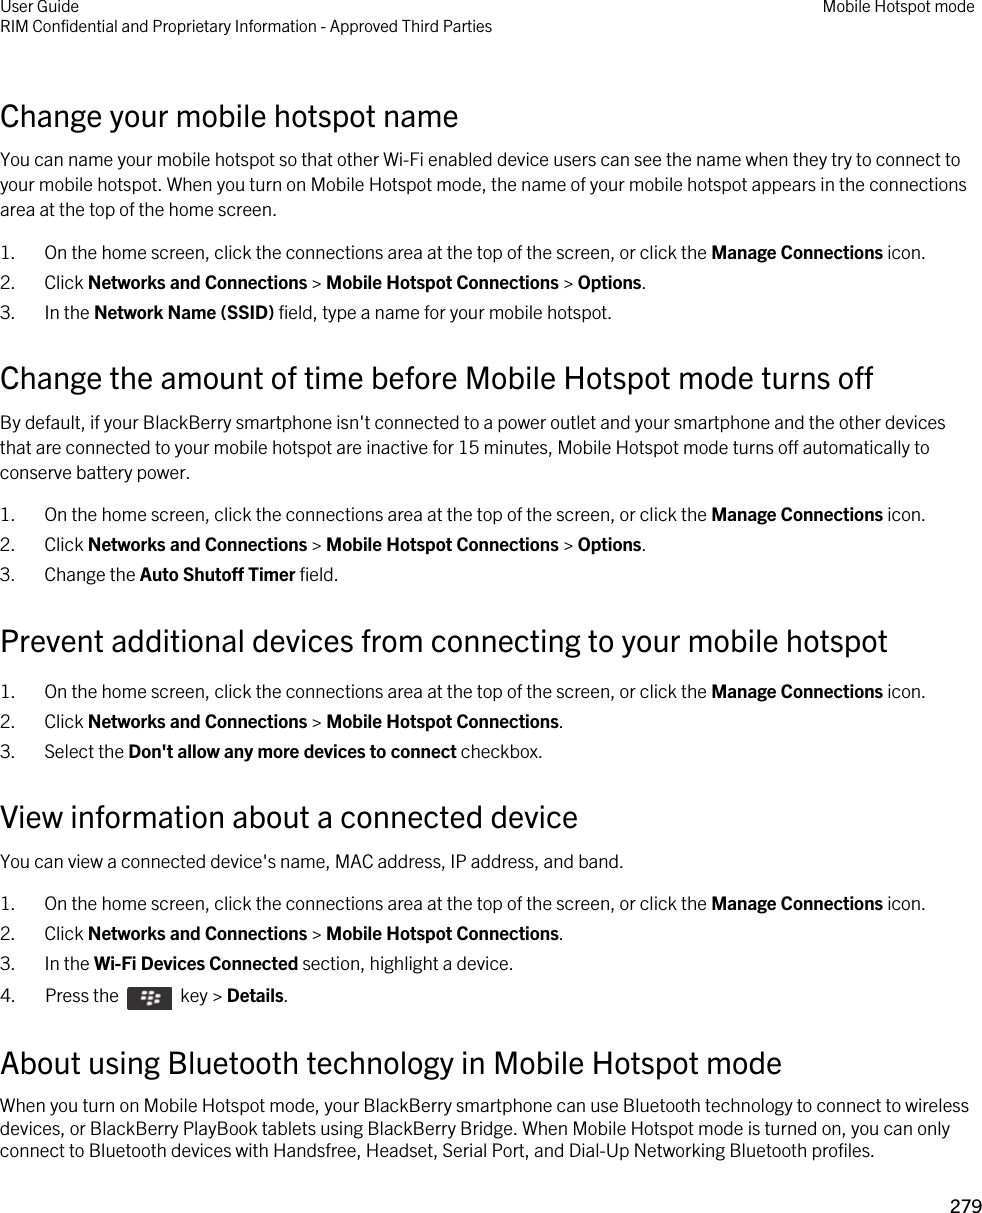 Change your mobile hotspot nameYou can name your mobile hotspot so that other Wi-Fi enabled device users can see the name when they try to connect to your mobile hotspot. When you turn on Mobile Hotspot mode, the name of your mobile hotspot appears in the connections area at the top of the home screen.1. On the home screen, click the connections area at the top of the screen, or click the Manage Connections icon.2. Click Networks and Connections &gt; Mobile Hotspot Connections &gt; Options.3. In the Network Name (SSID) field, type a name for your mobile hotspot.Change the amount of time before Mobile Hotspot mode turns offBy default, if your BlackBerry smartphone isn&apos;t connected to a power outlet and your smartphone and the other devices that are connected to your mobile hotspot are inactive for 15 minutes, Mobile Hotspot mode turns off automatically to conserve battery power.1. On the home screen, click the connections area at the top of the screen, or click the Manage Connections icon.2. Click Networks and Connections &gt; Mobile Hotspot Connections &gt; Options.3. Change the Auto Shutoff Timer field.Prevent additional devices from connecting to your mobile hotspot1. On the home screen, click the connections area at the top of the screen, or click the Manage Connections icon.2. Click Networks and Connections &gt; Mobile Hotspot Connections.3. Select the Don&apos;t allow any more devices to connect checkbox.View information about a connected deviceYou can view a connected device&apos;s name, MAC address, IP address, and band.1. On the home screen, click the connections area at the top of the screen, or click the Manage Connections icon.2. Click Networks and Connections &gt; Mobile Hotspot Connections.3. In the Wi-Fi Devices Connected section, highlight a device.4.  Press the    key &gt; Details.About using Bluetooth technology in Mobile Hotspot modeWhen you turn on Mobile Hotspot mode, your BlackBerry smartphone can use Bluetooth technology to connect to wireless devices, or BlackBerry PlayBook tablets using BlackBerry Bridge. When Mobile Hotspot mode is turned on, you can only connect to Bluetooth devices with Handsfree, Headset, Serial Port, and Dial-Up Networking Bluetooth profiles.User GuideRIM Confidential and Proprietary Information - Approved Third Parties Mobile Hotspot mode279 